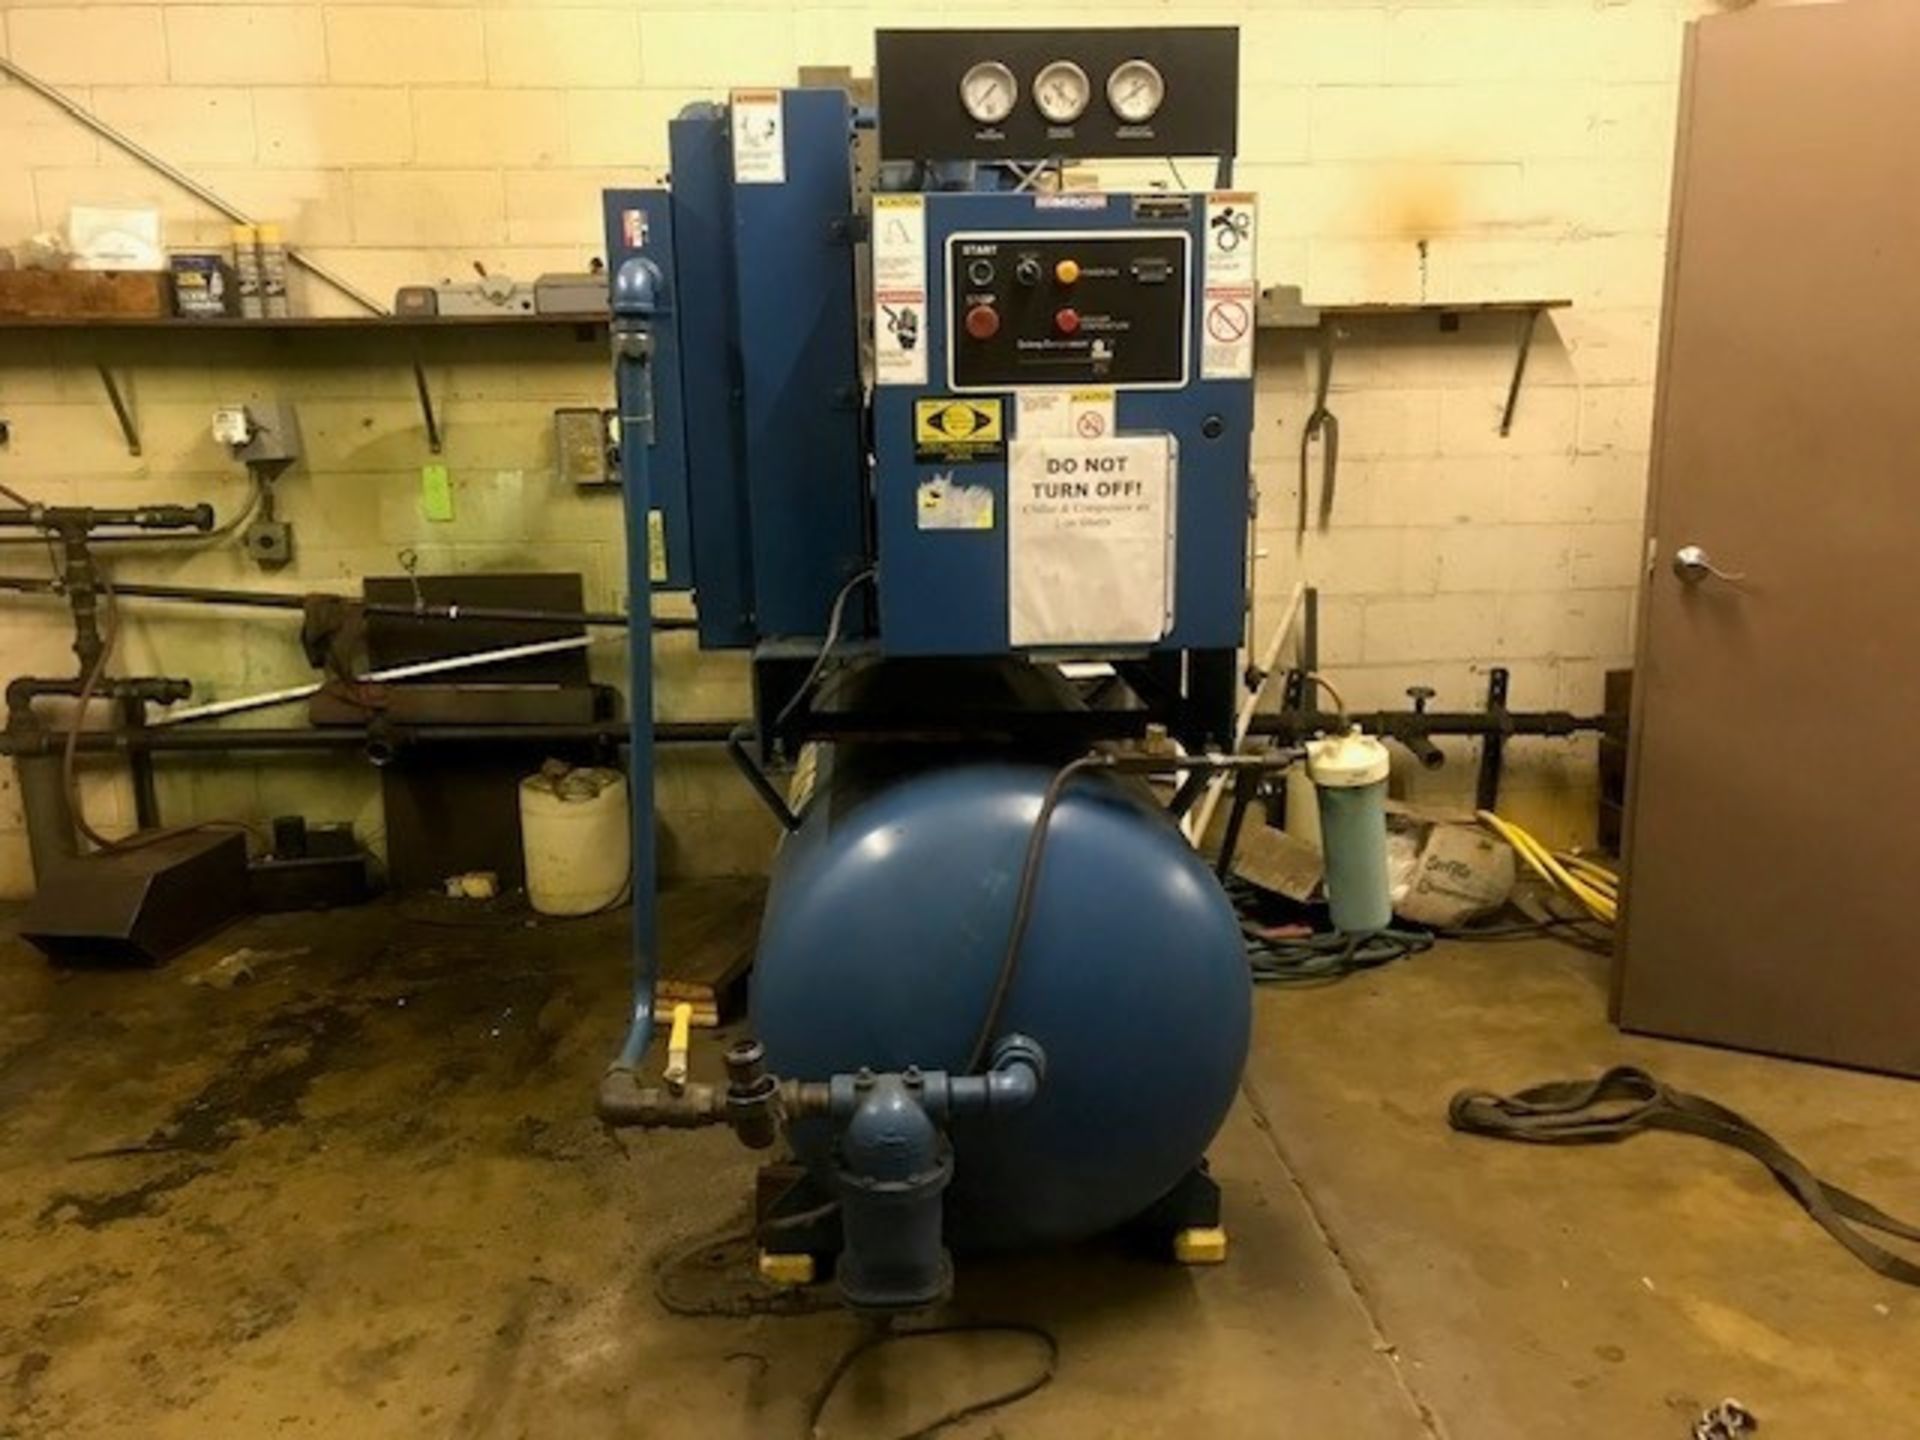 Quincy Screw Air Compressor, Water Cooled, Hrs. 82045.2 (Load Fee $300) (Located Union Grove, WI) - Image 3 of 5